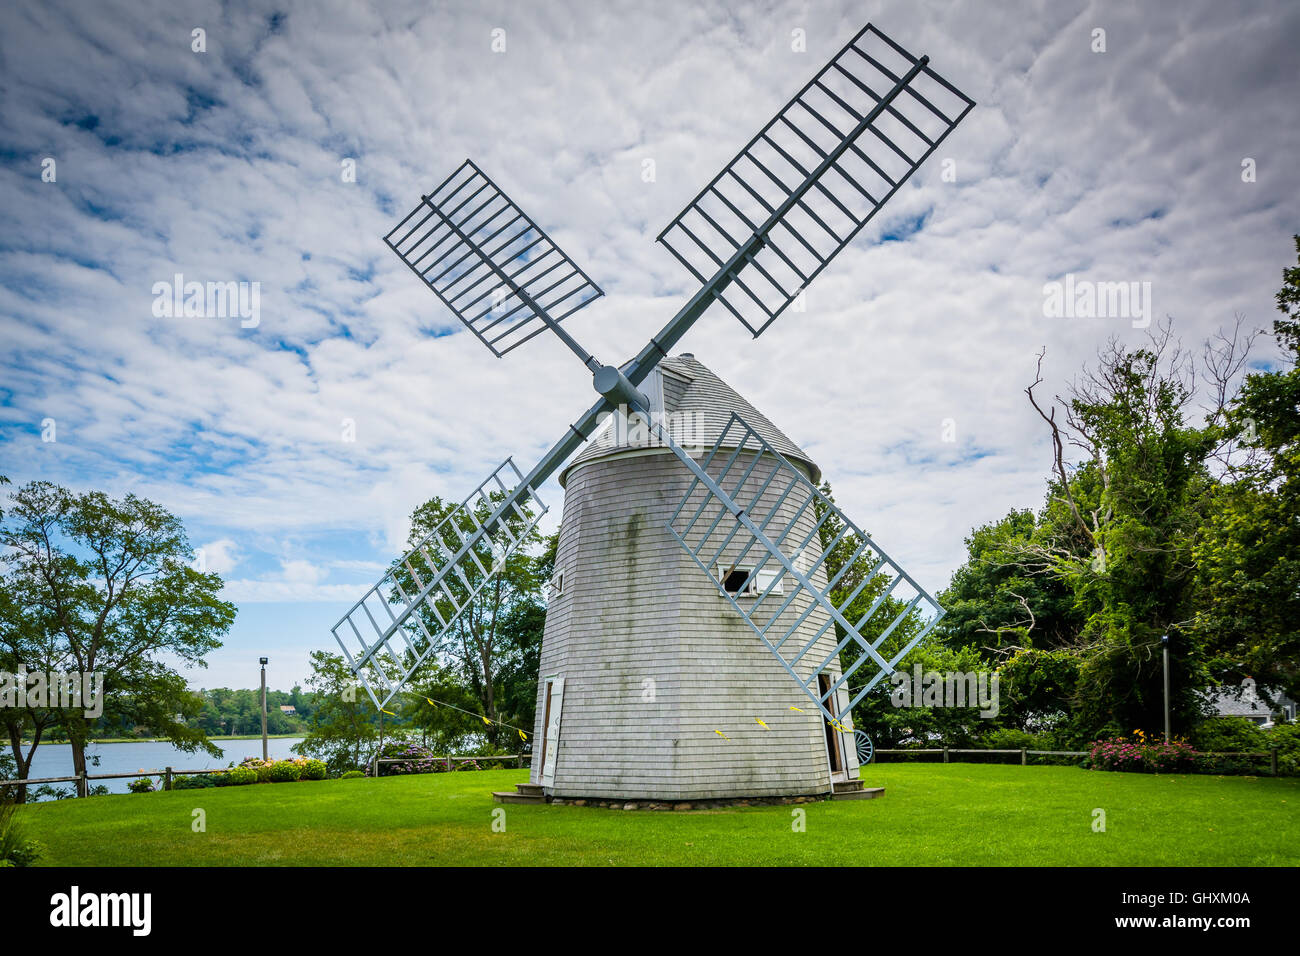 Jonathan Young Windmühle in Orleans, Cape Cod, Massachusetts. Stockfoto